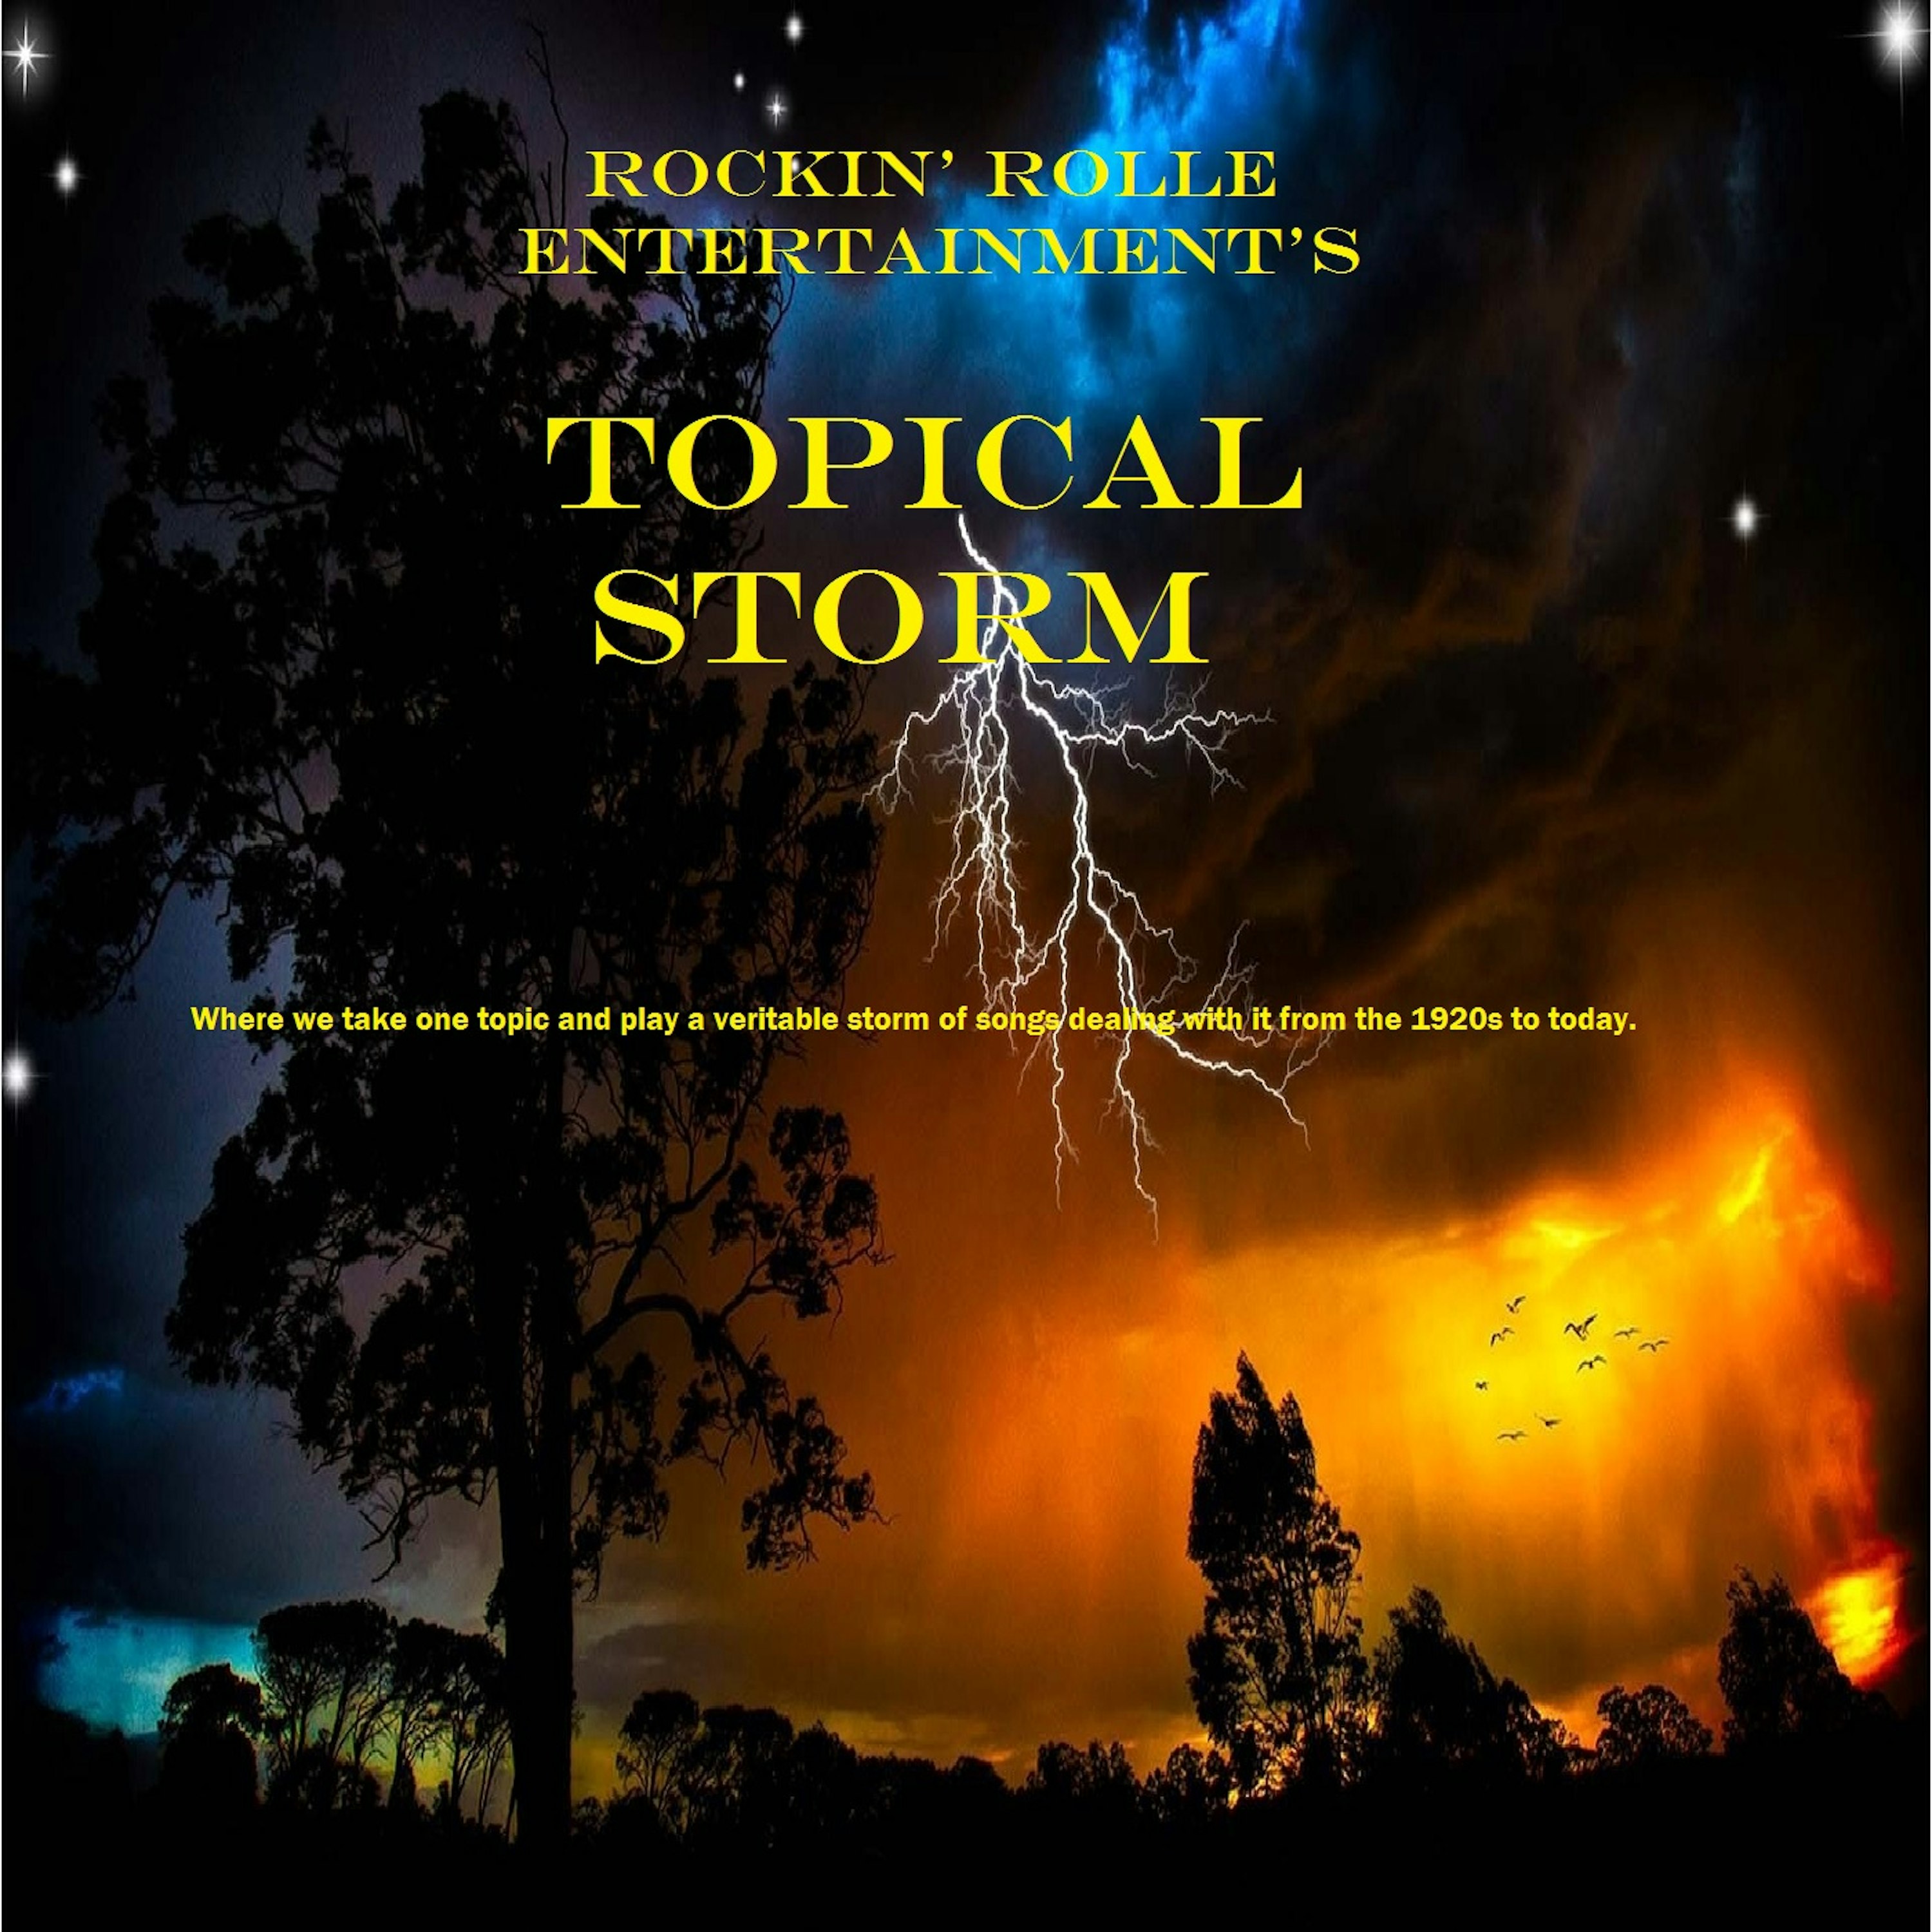 Rockin' Rolle Entertainment's TOPICAL STORM